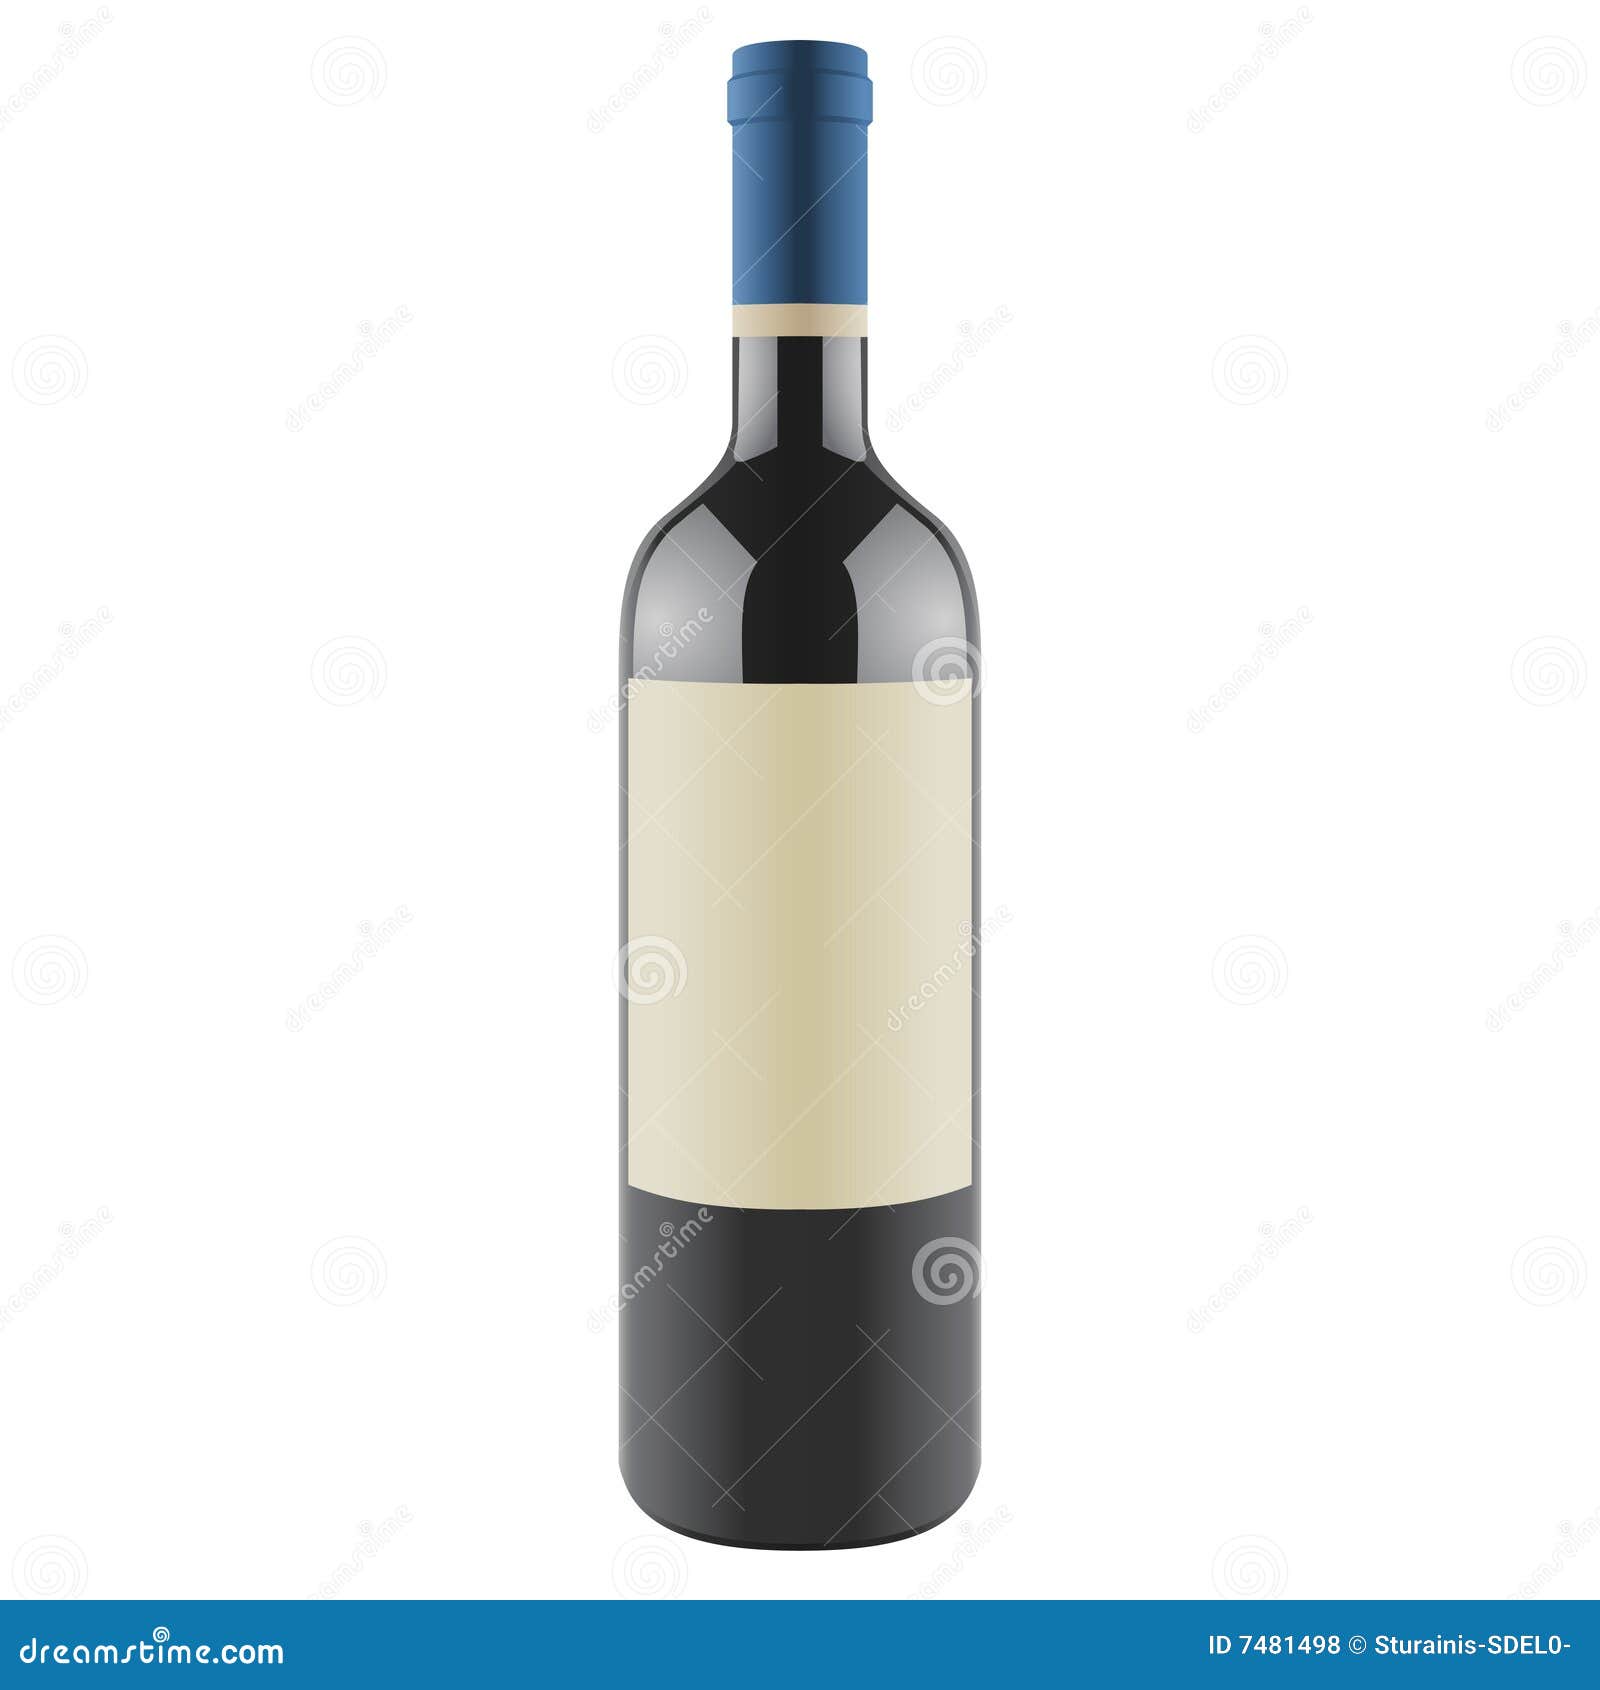 Vector dark glass wine bottle with a blank label.